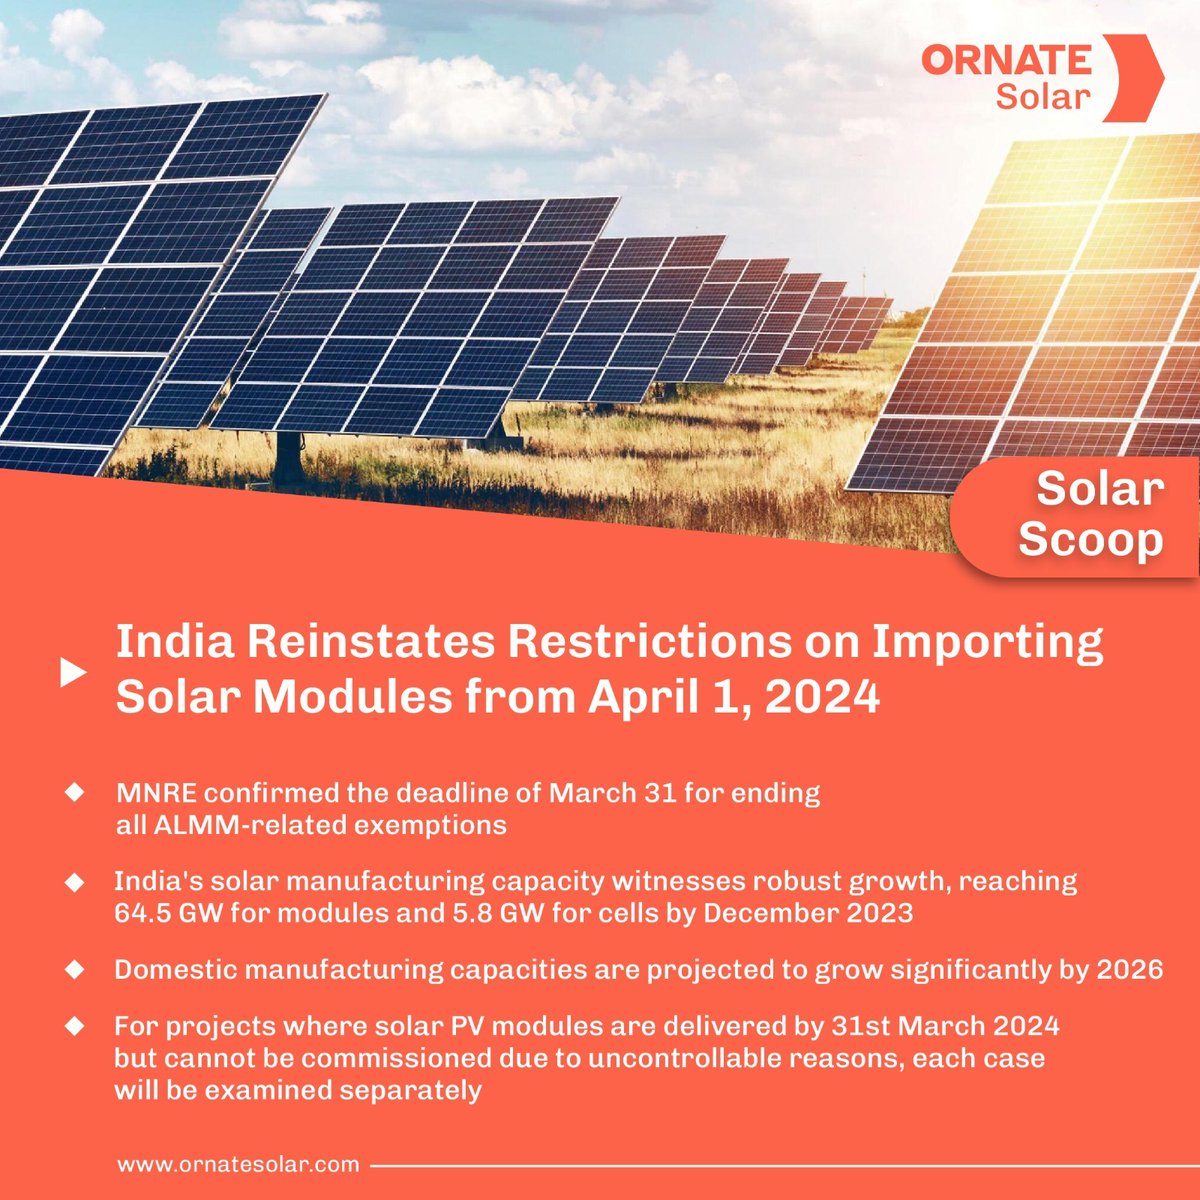 Empowering India's Solar Future: Domestic Manufacturing Surge Amidst Renewed Import Restrictions

Get the full scoop here 👇🏽
.
.
#OrnateSolar #Solarscoop #ALMM